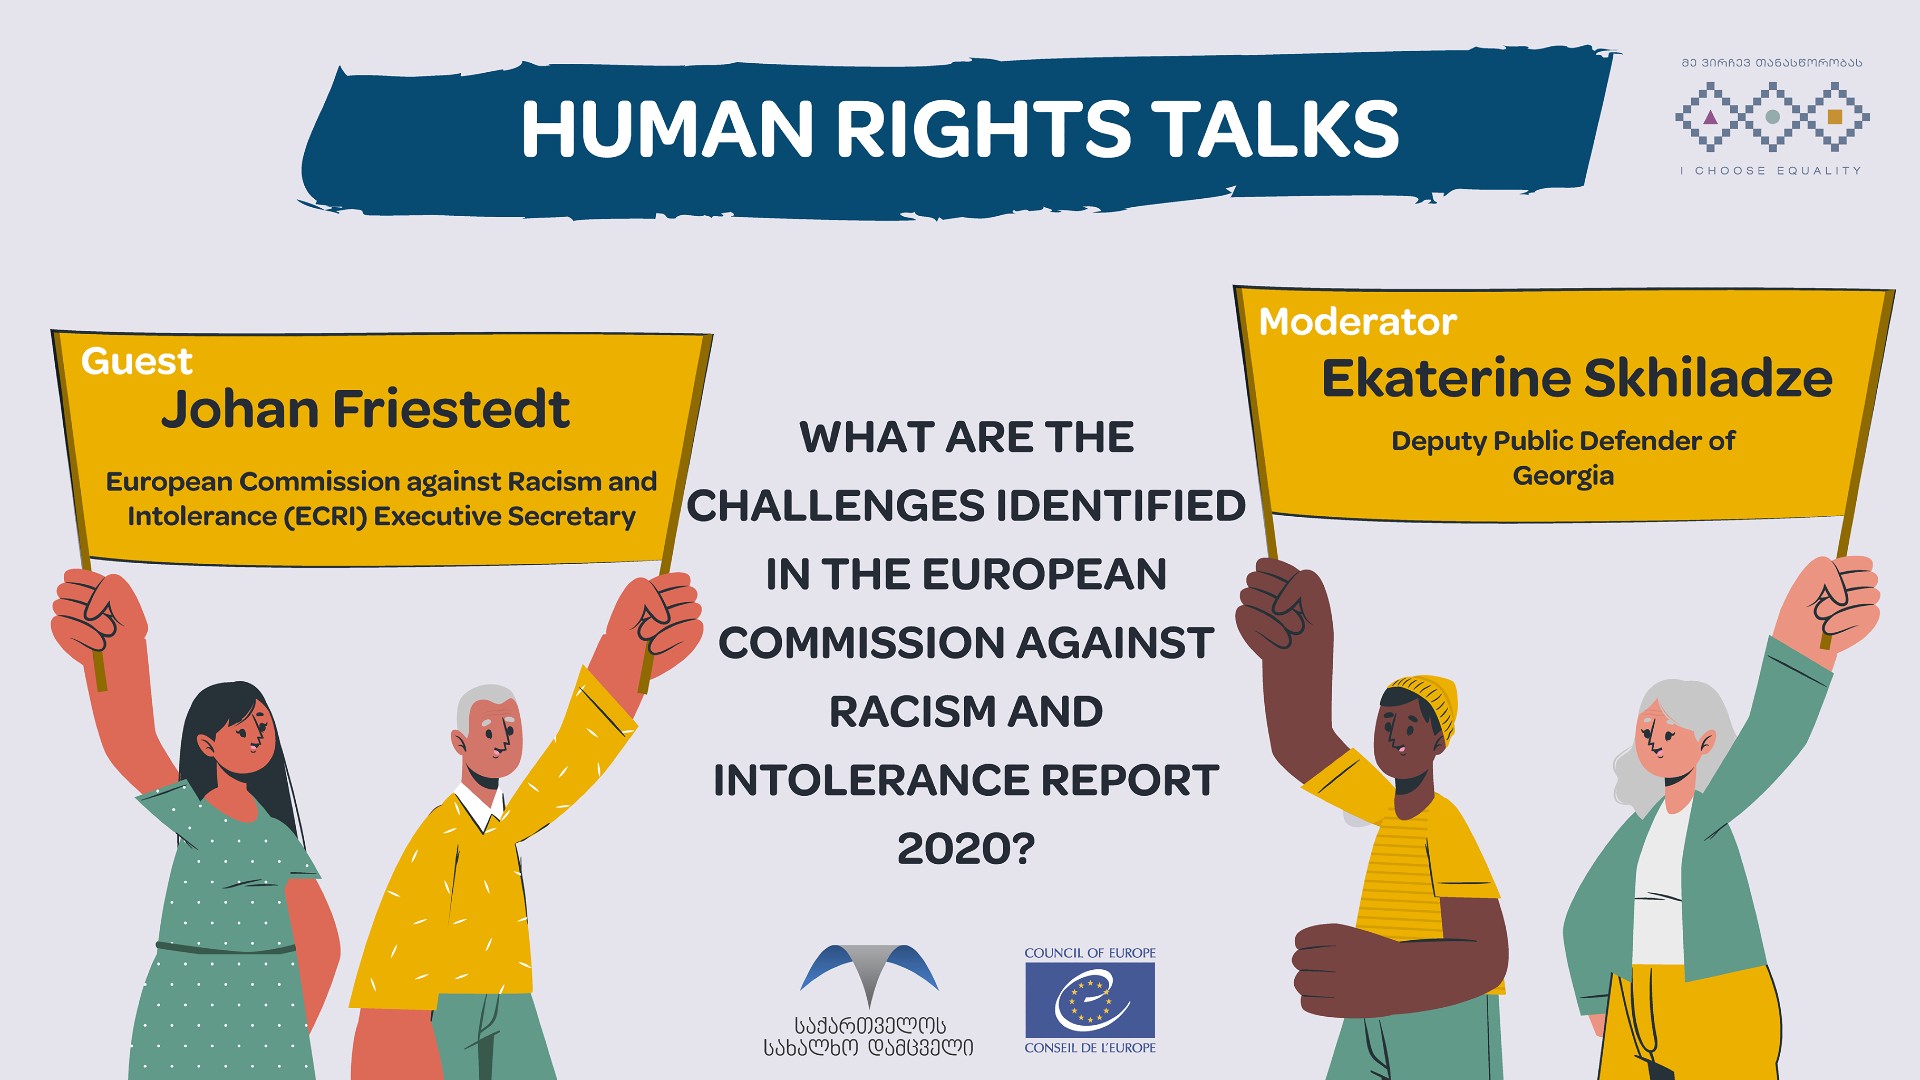 The European Commission against Racism and Intolerance   Executive Secretary, Johan Friestedt will talk about the challenges identified in the ECRI annual report 2020